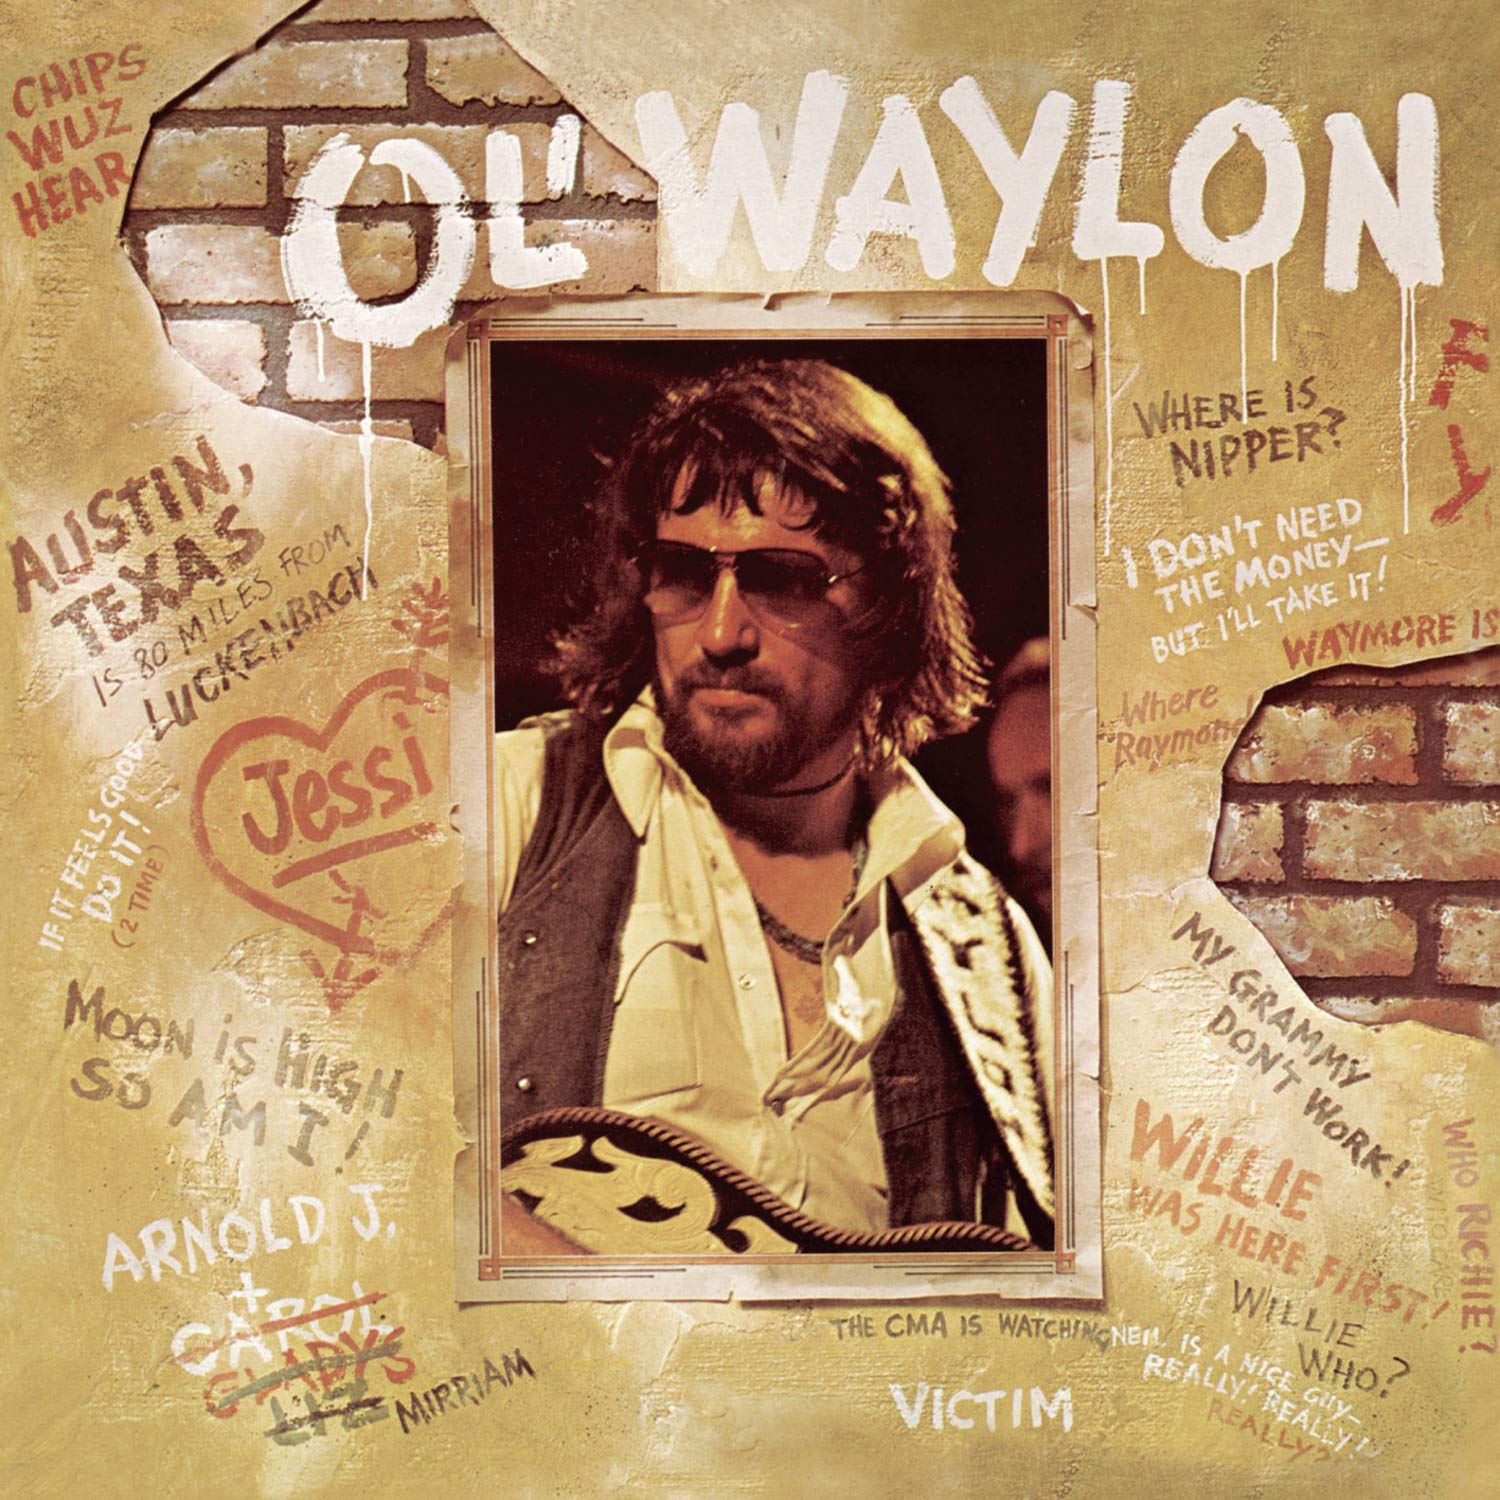 Waylon's Wild Frontier: A Tribute to a Country Icon